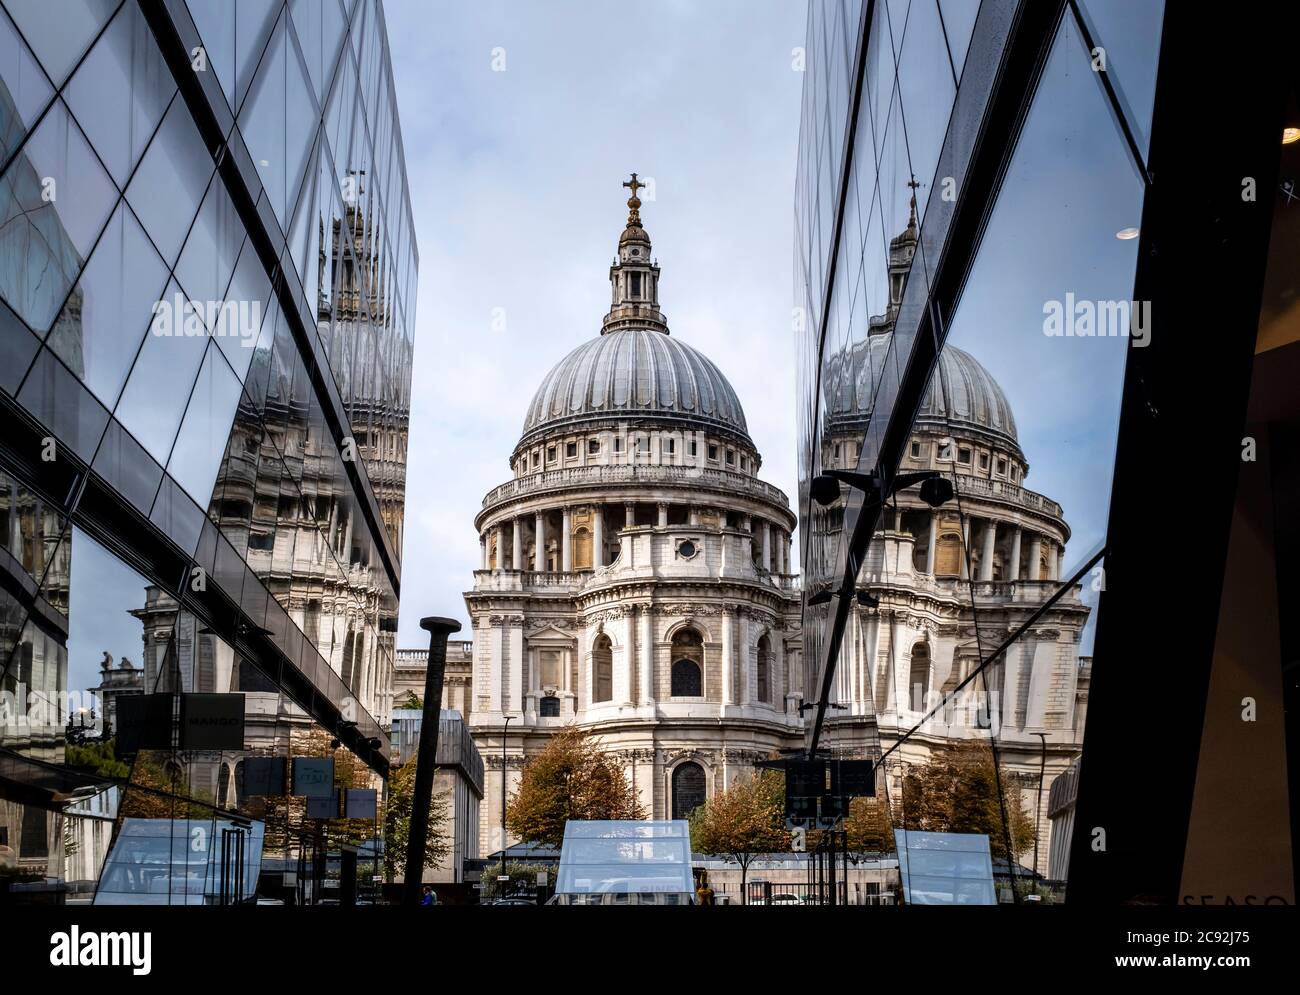 St Paul’s Cathedral Reflected In The Windows Of One New Change Shopping Centre, London, England. Stock Photo